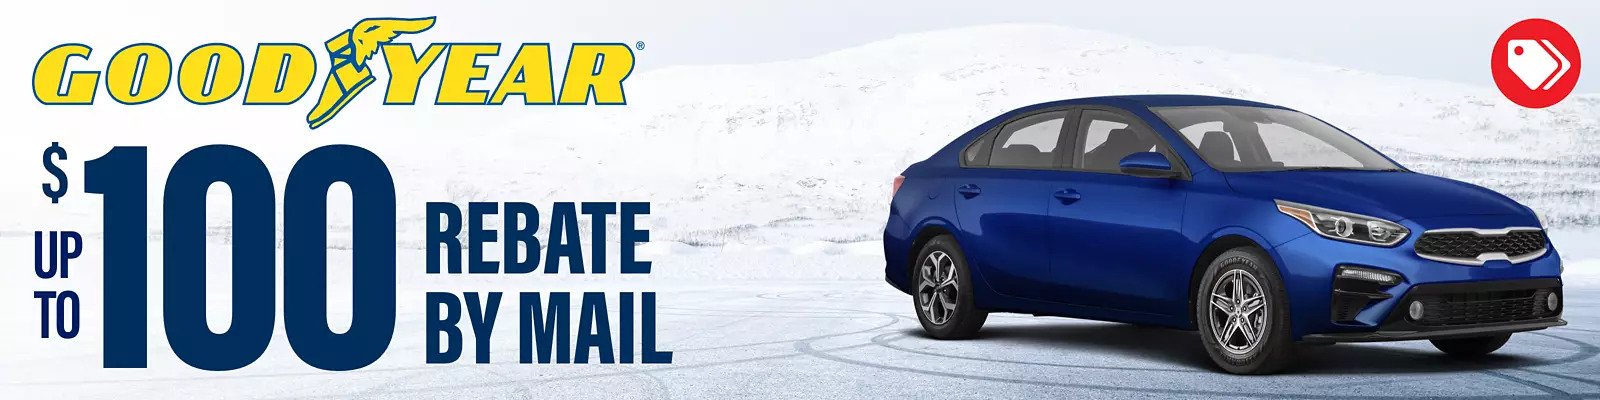 Goodyear tire rebate for January 2022 with Discount Tire Direct